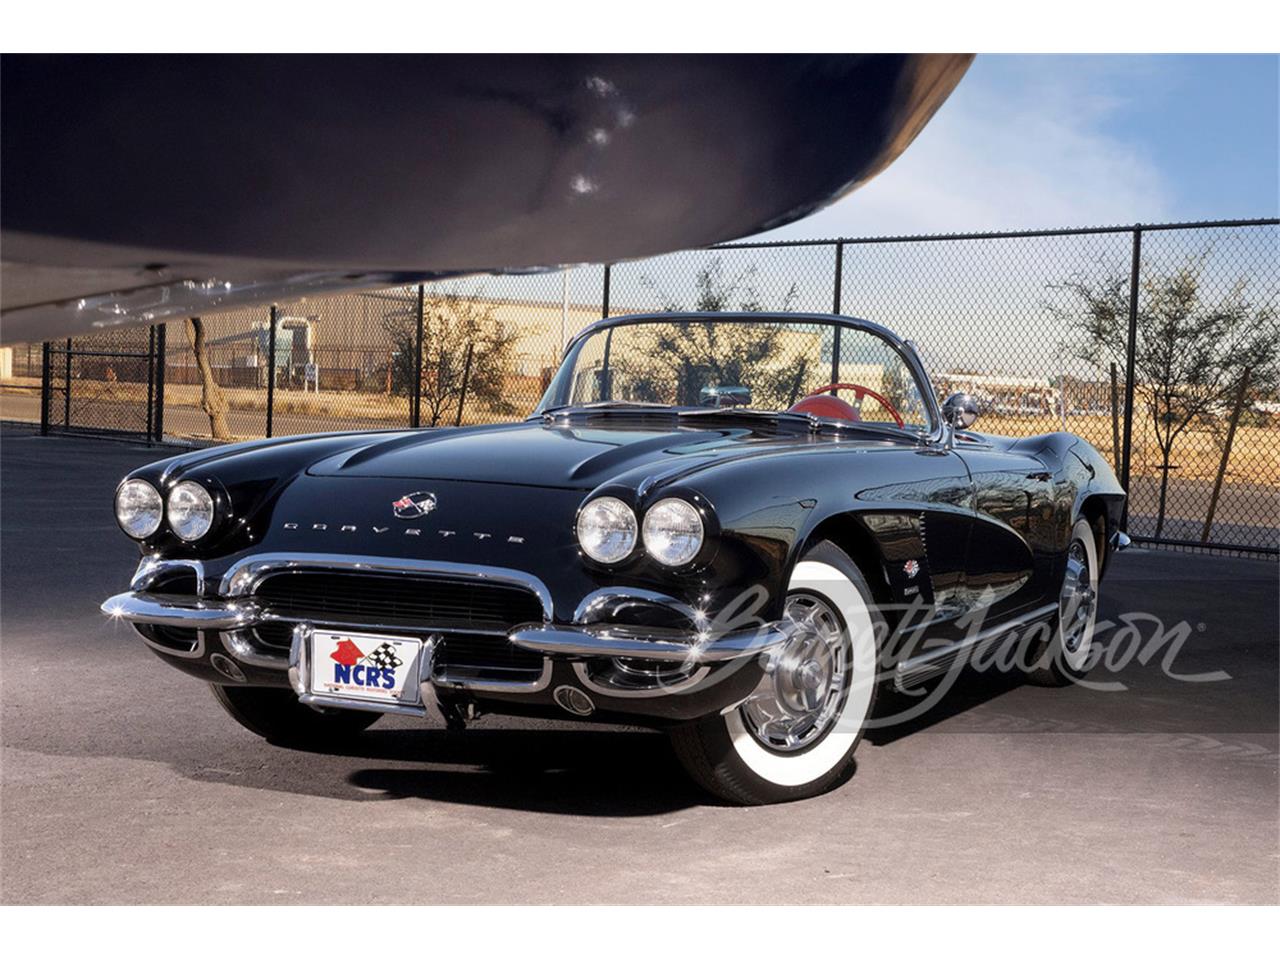 For Sale at Auction: 1962 Chevrolet Corvette in Scottsdale, Arizona for sale in Scottsdale, AZ